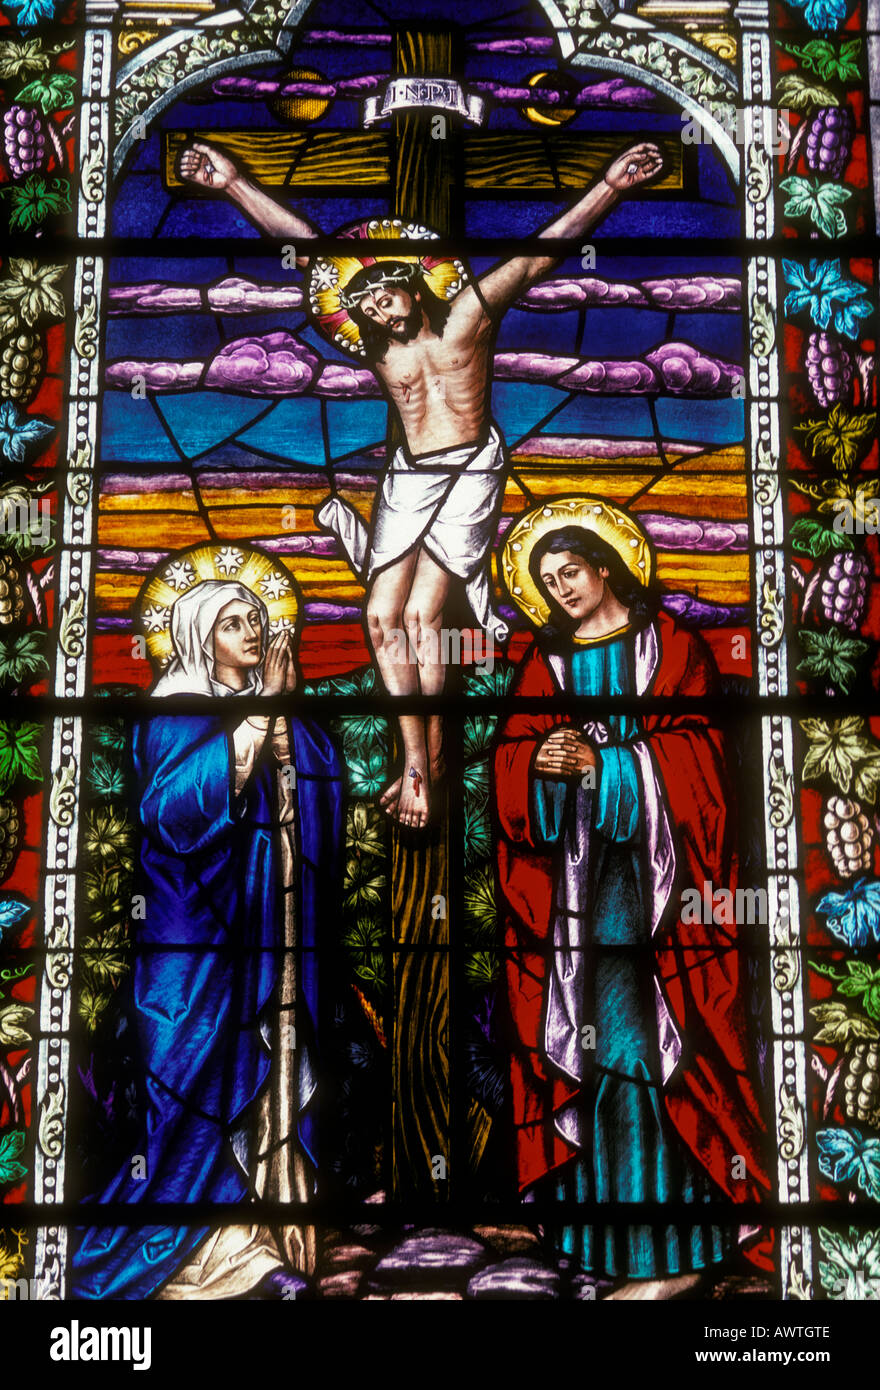 stained glass window, Crucifixion of the Lord Jesus Christ, Crucifixion of Jesus, Mary Mother of Jesus, John the Apostle, Stock Photo